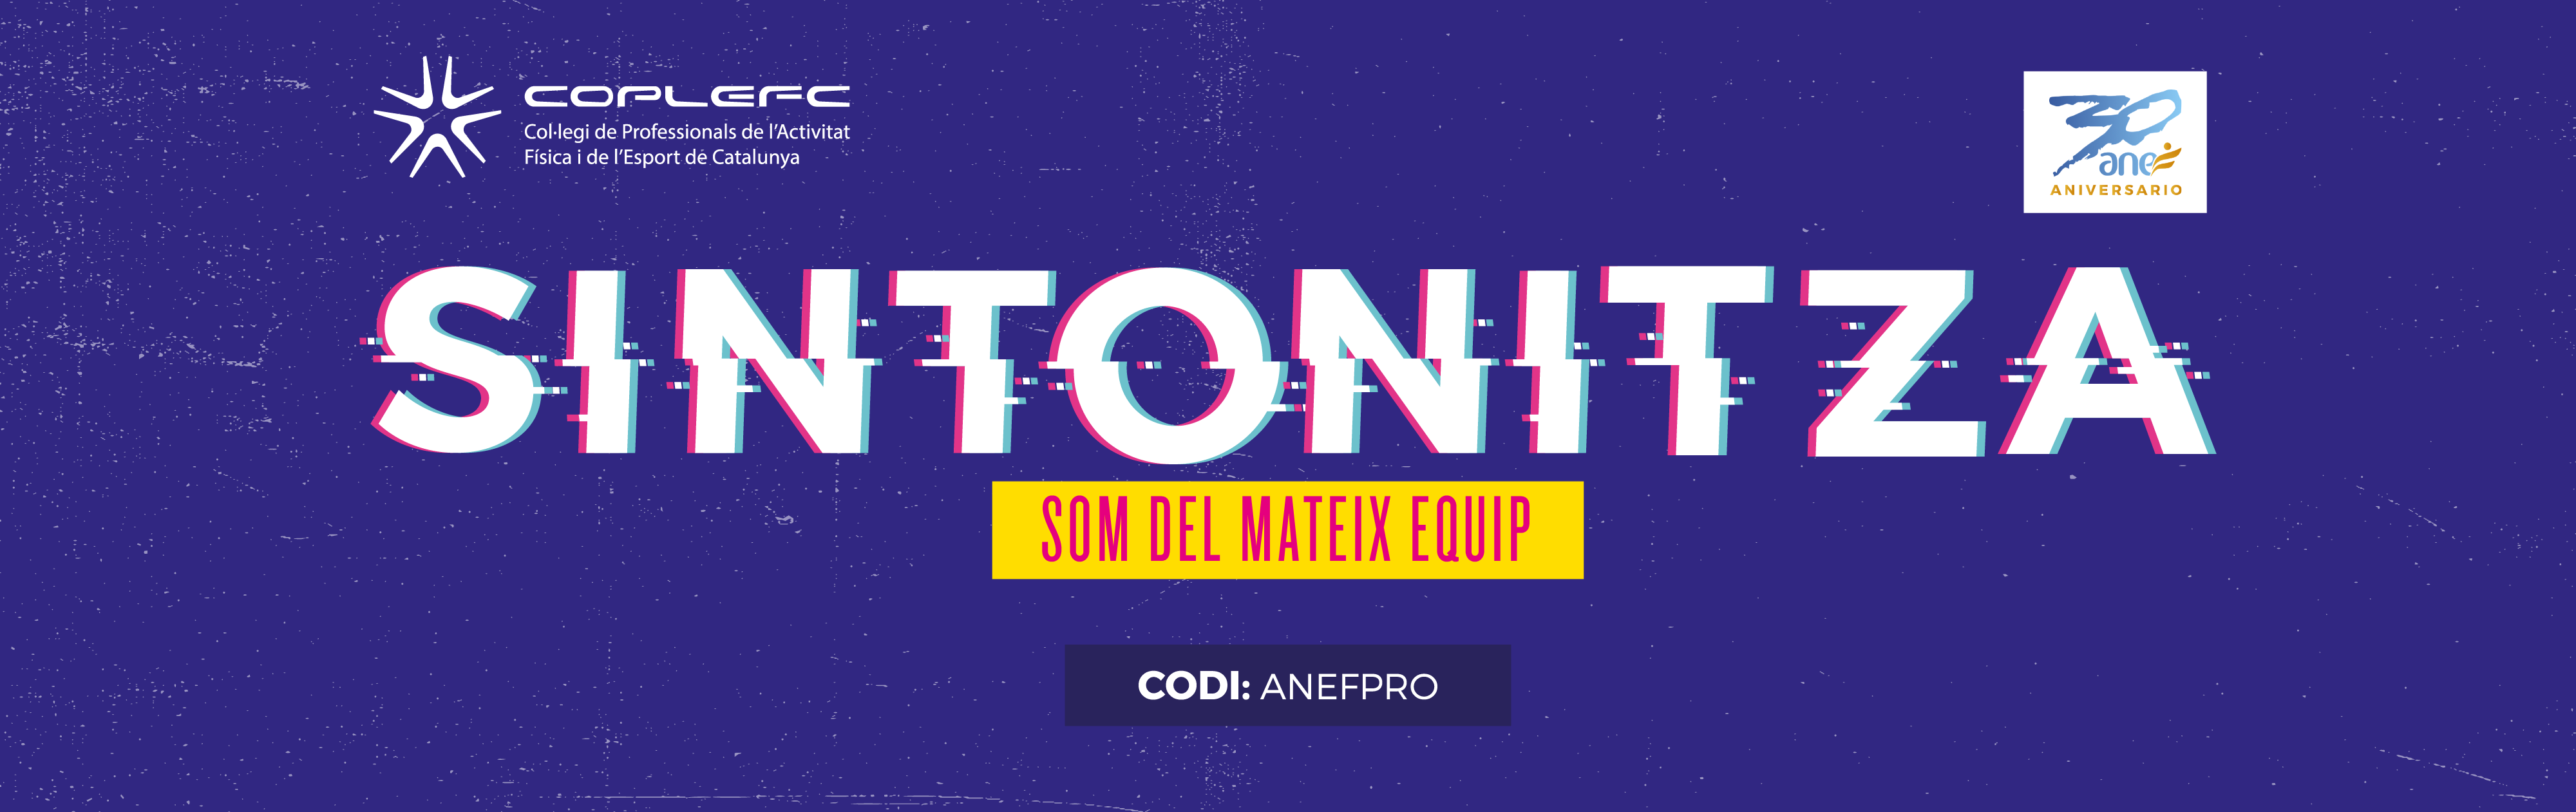 PROMO-ANEF.png (355 KB)